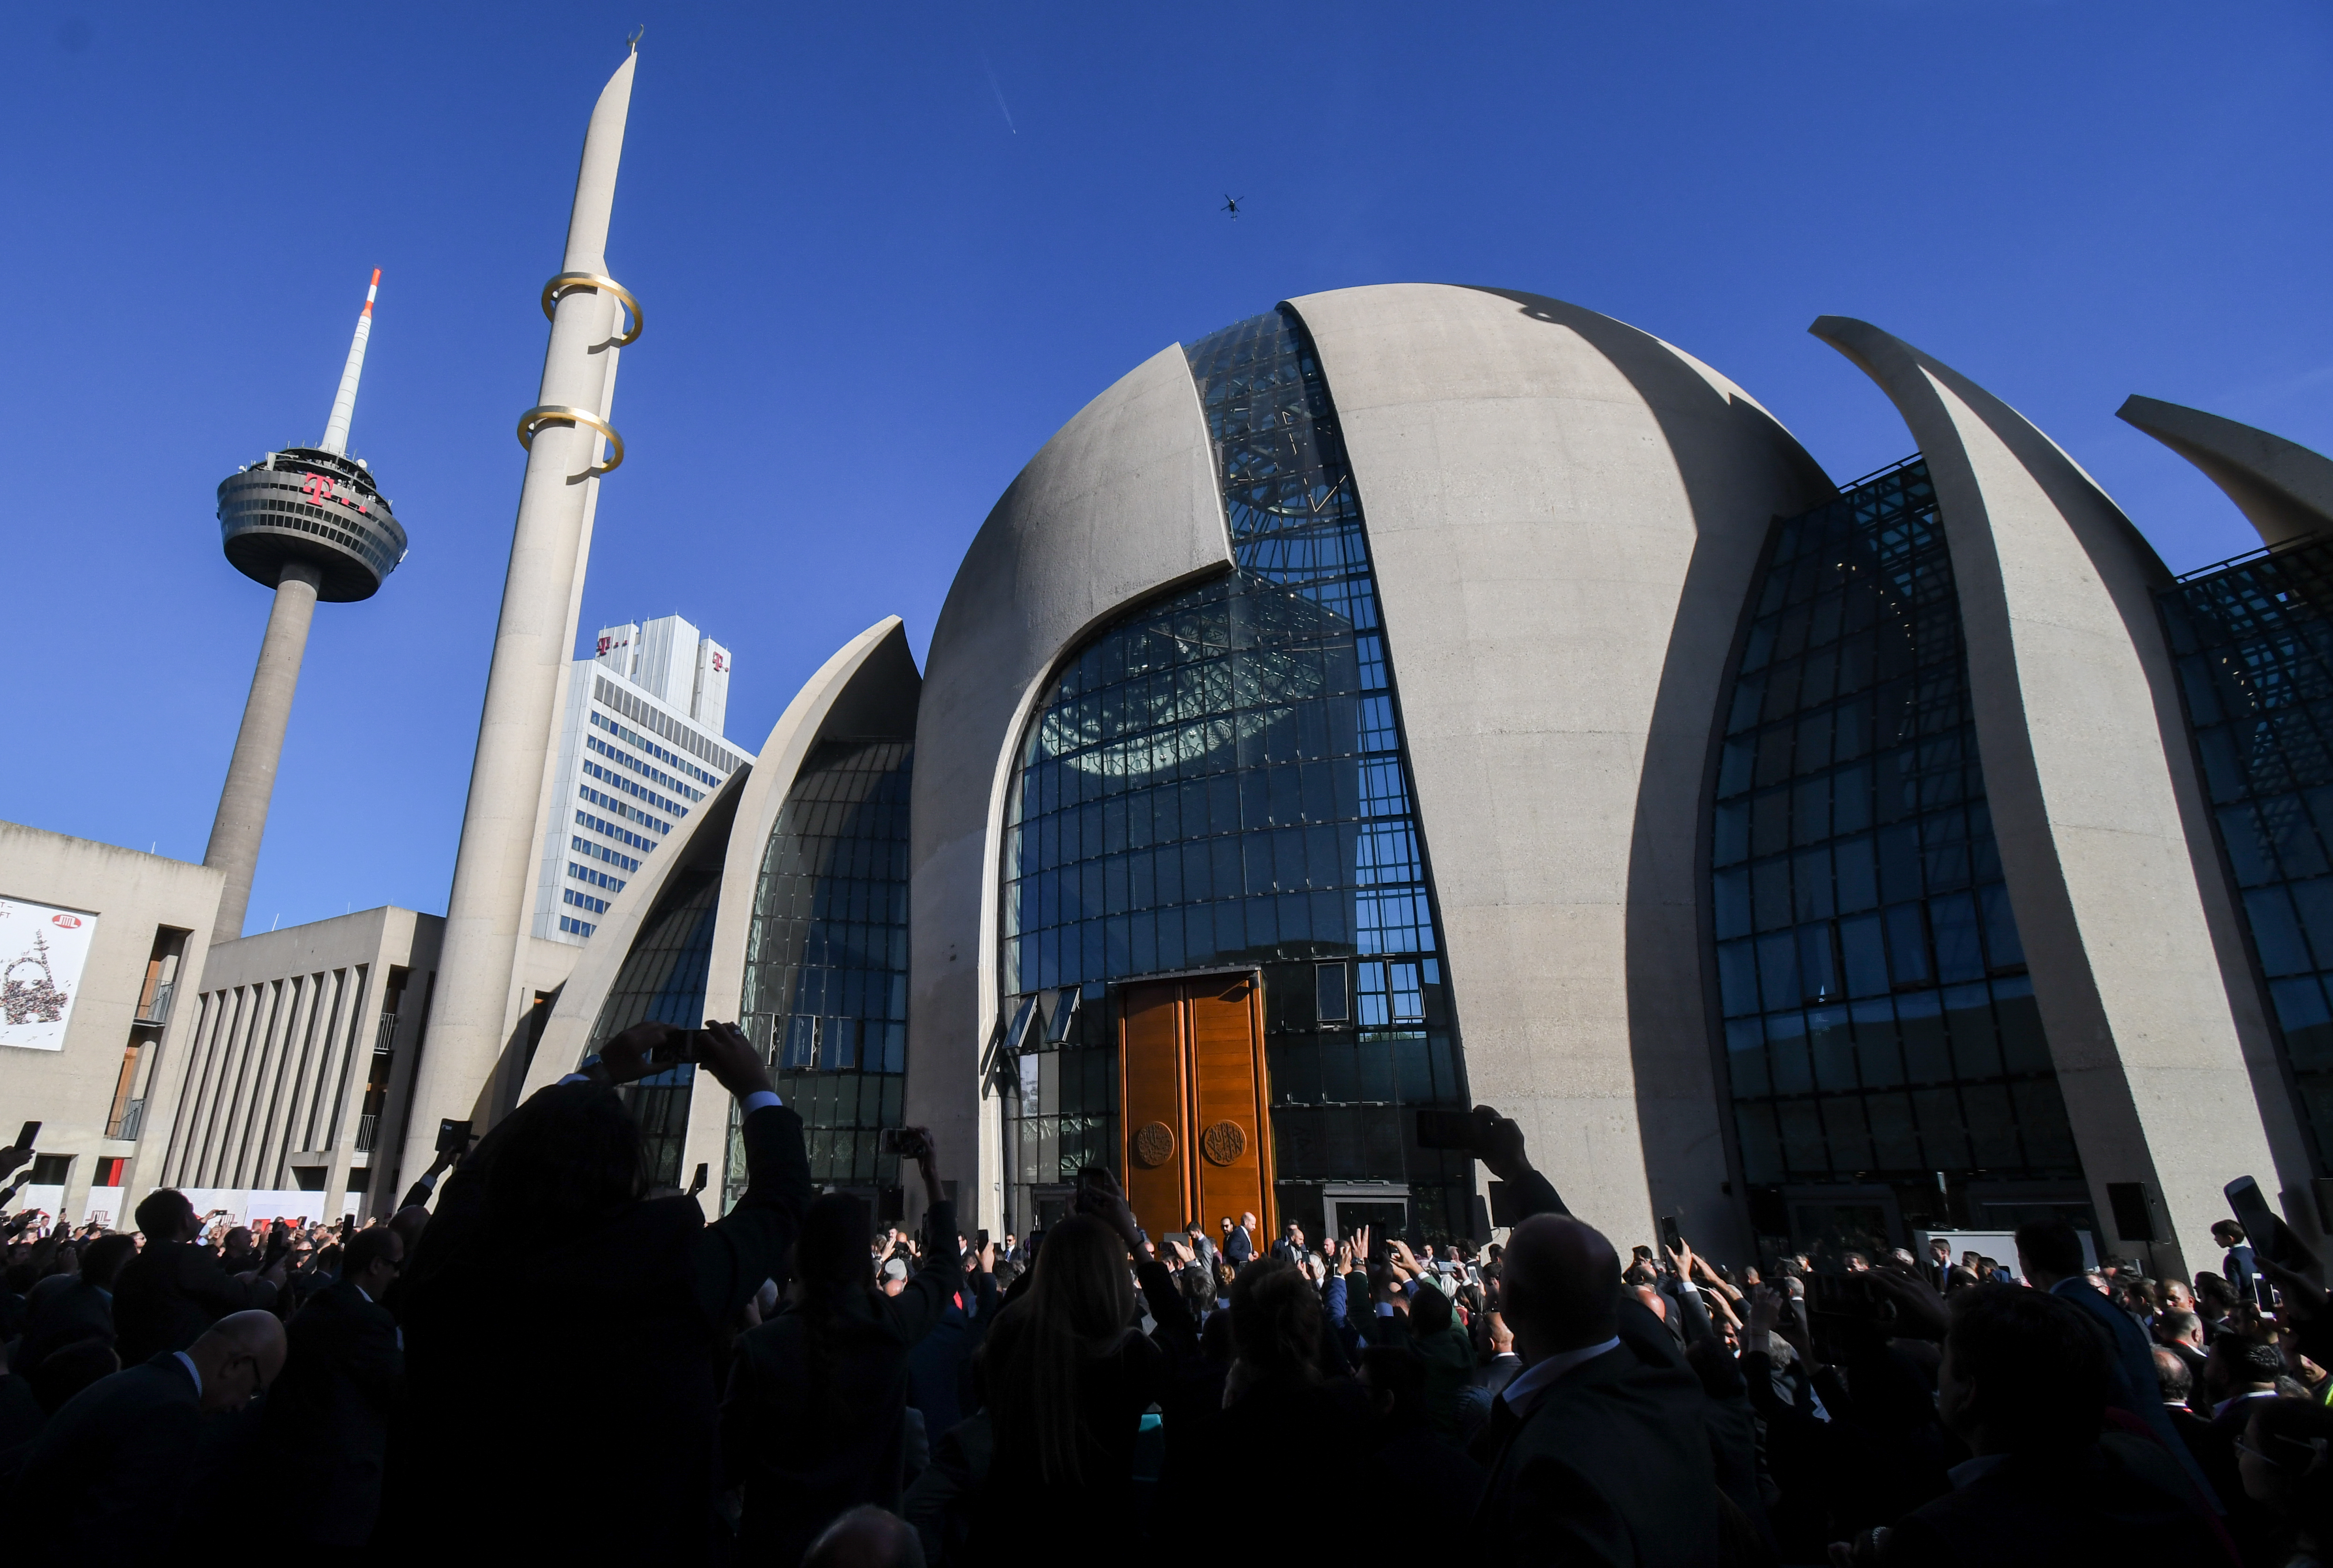  No welcome for non-Muslims at inauguration of Germany's biggest mosque